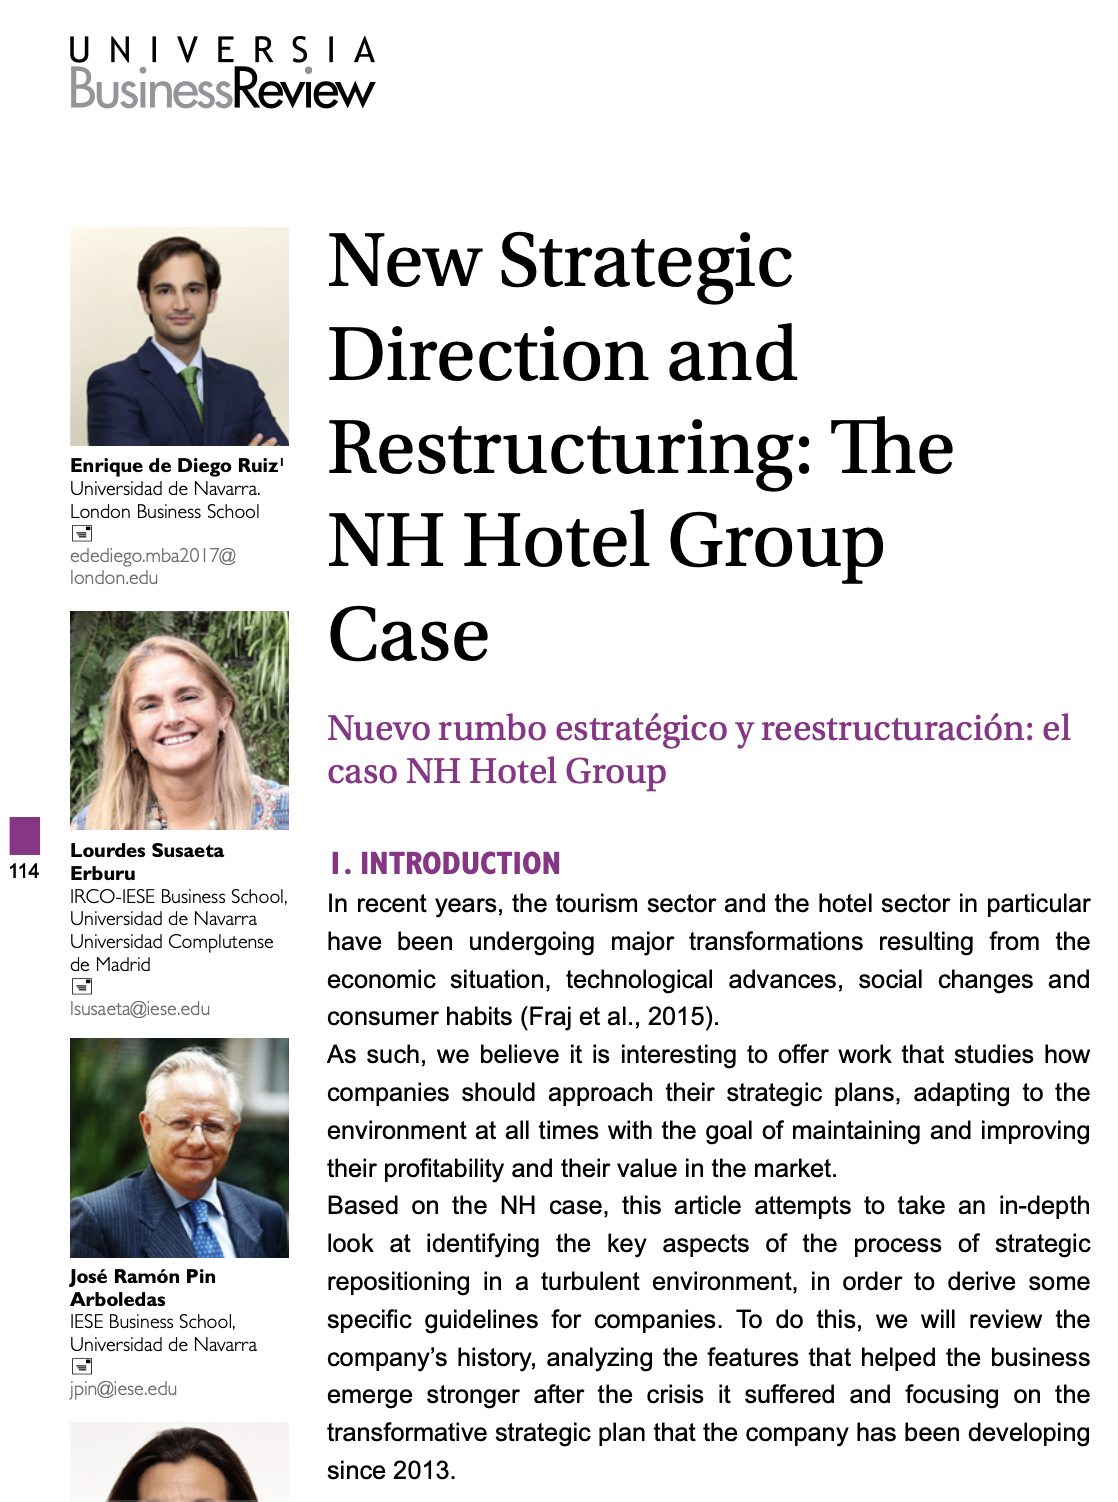 New Strategic Direction and Restructuring: The NH Hotel Group Case